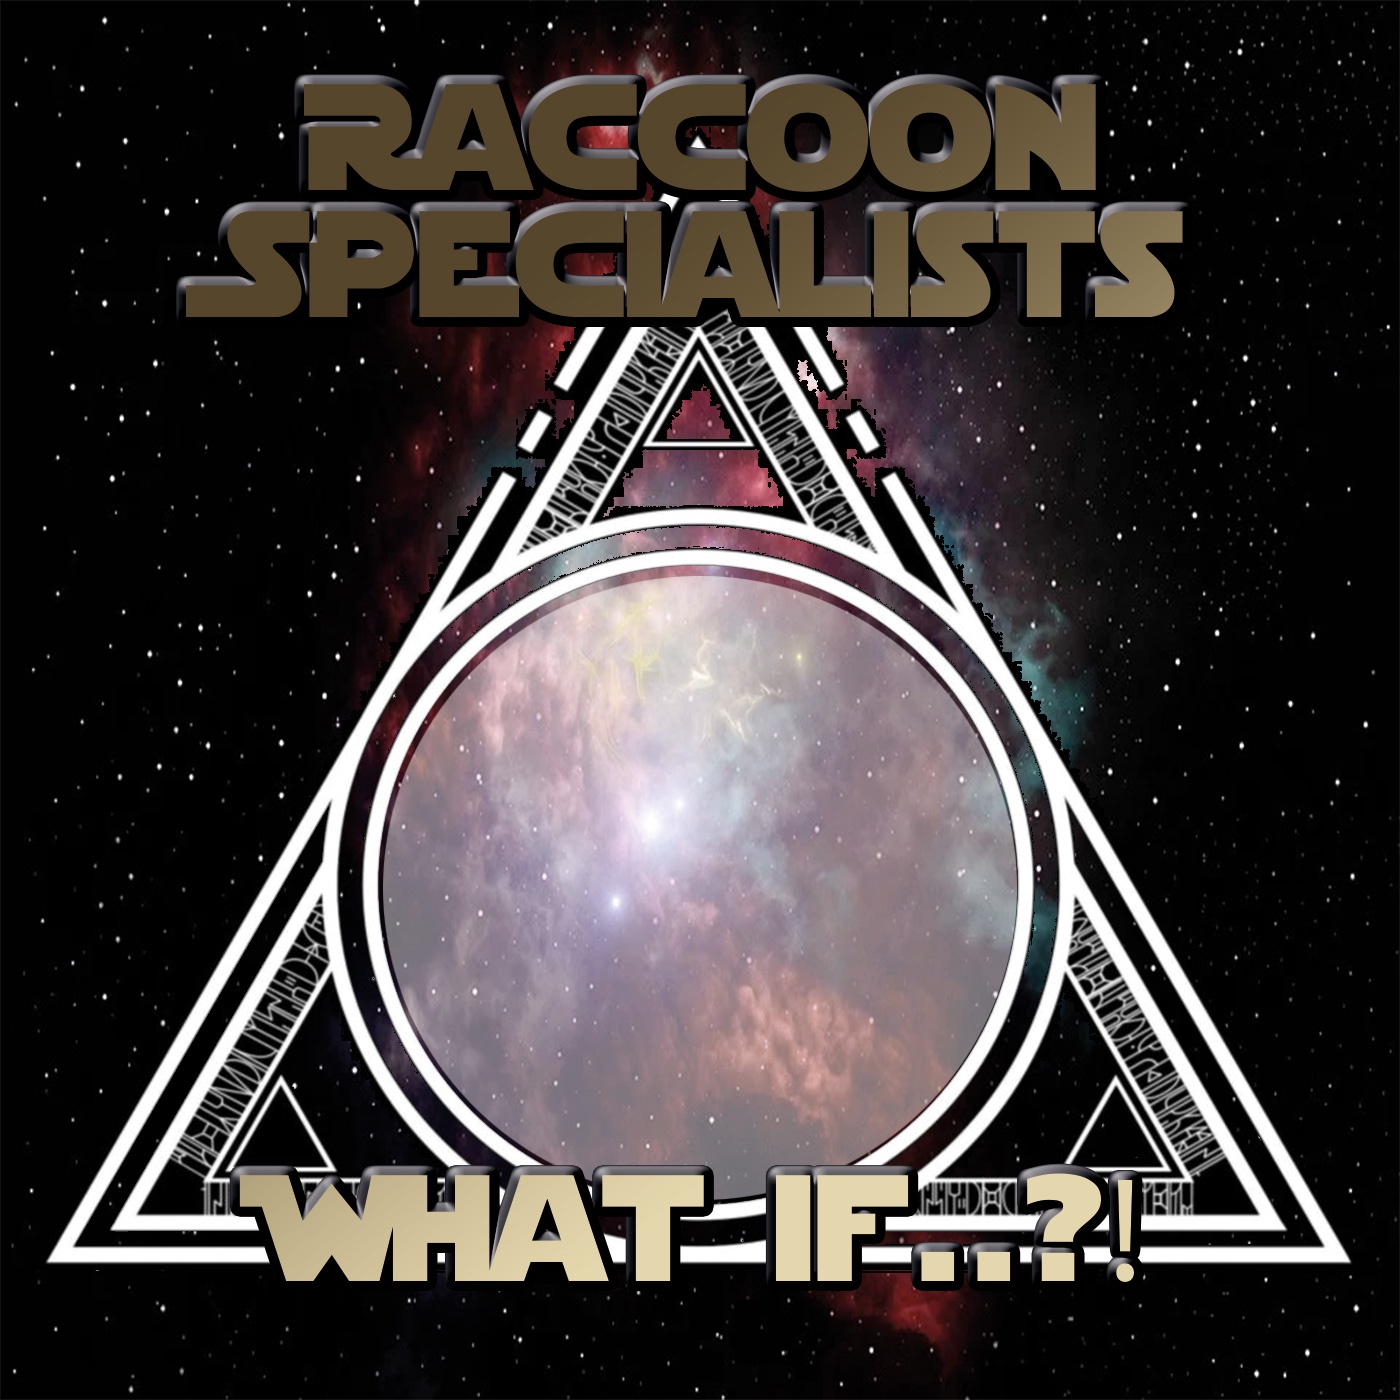 Raccoon Specialists - What if...?